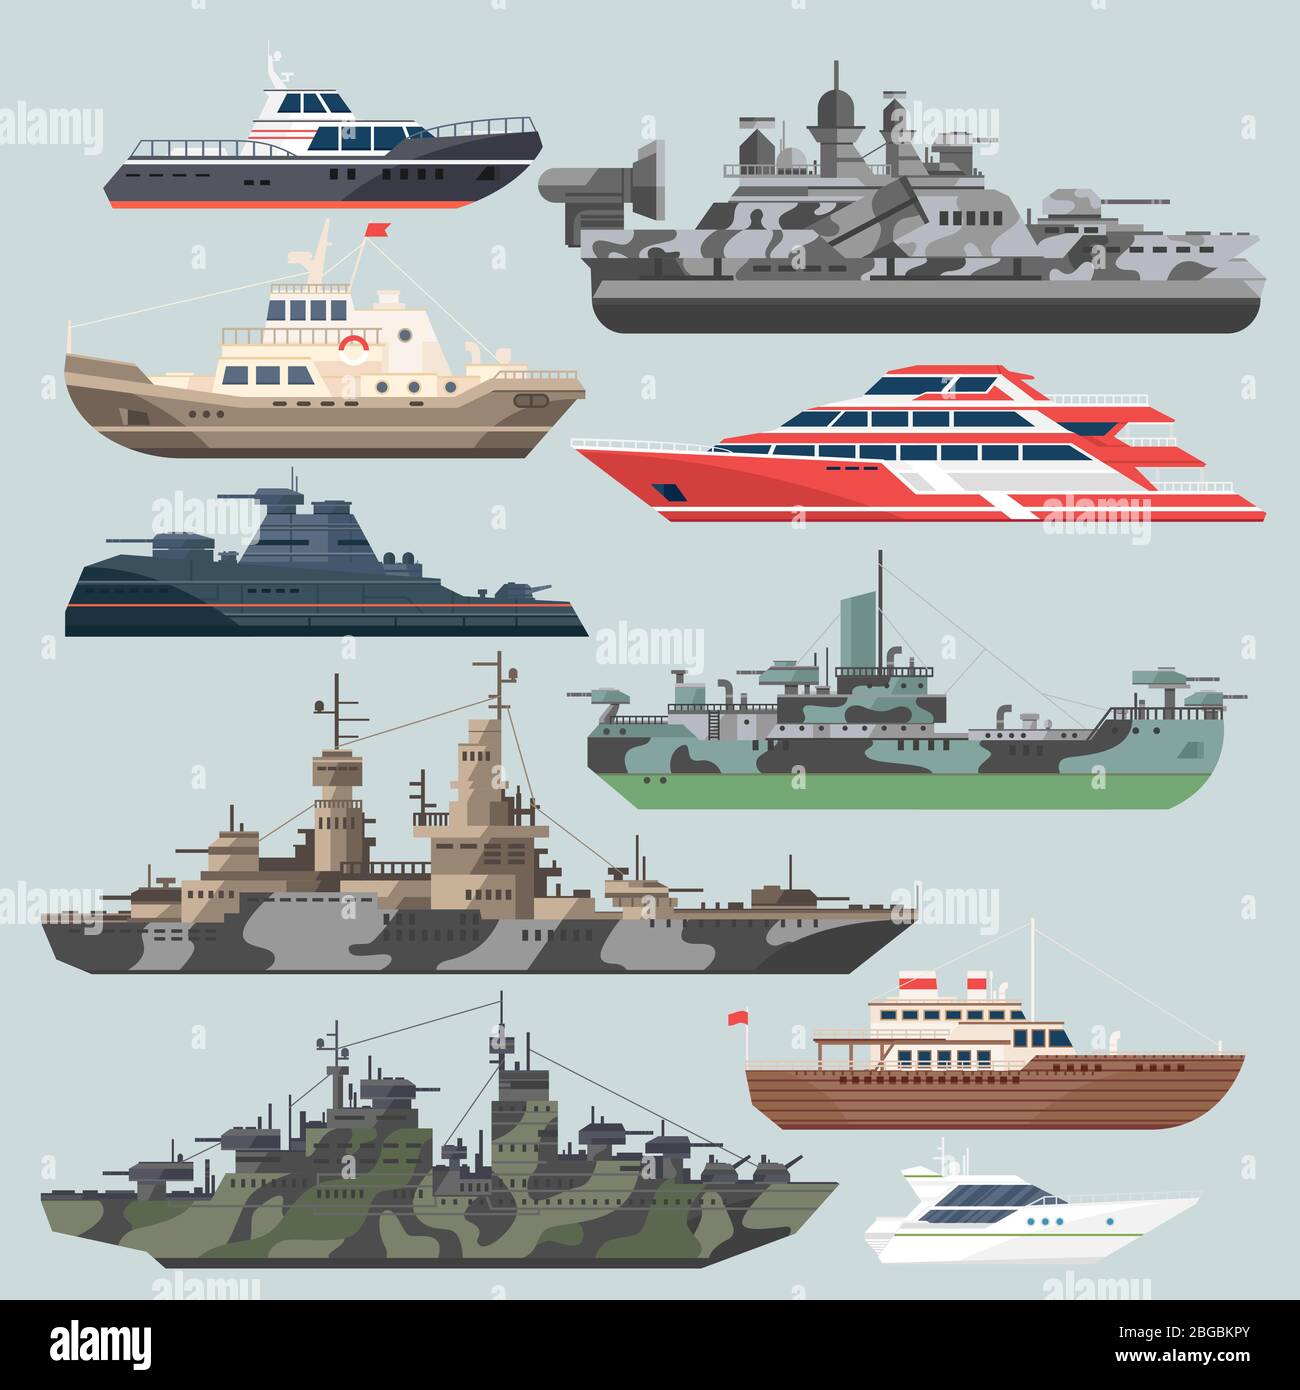 Passenger ships and battleships. Submarine destroyer in the sea. Water boats vector illustrations in flat style Stock Vector